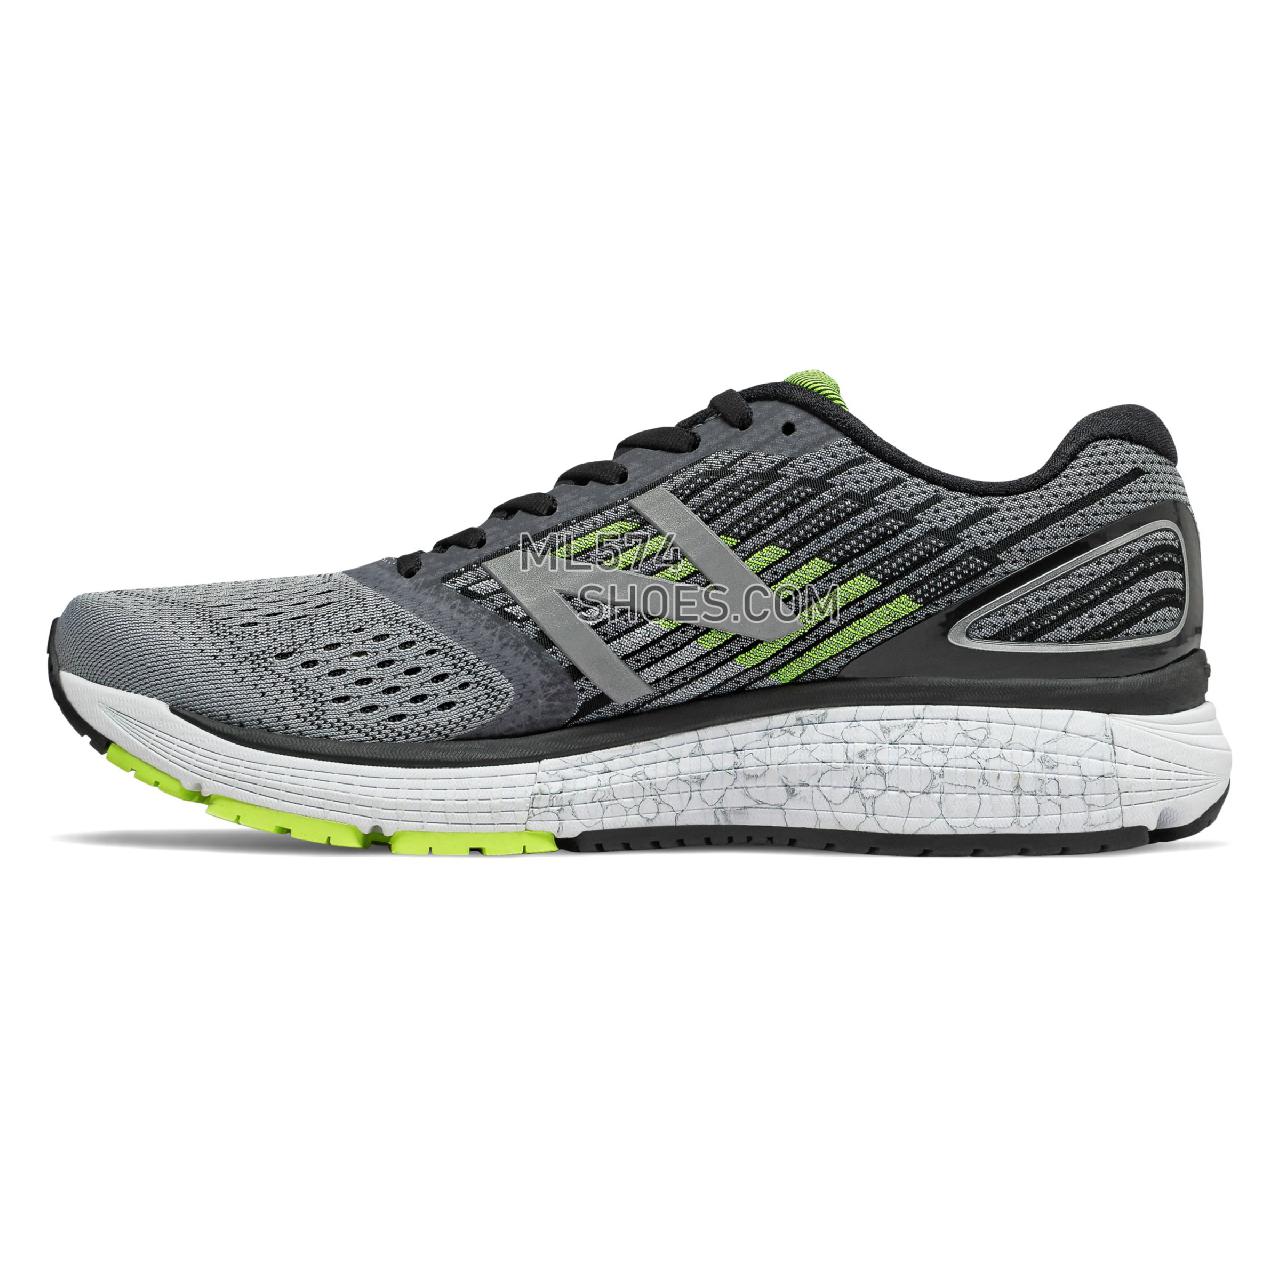 New Balance 860v9 - Men's 860 - Running Steel with Hi-Lite and Black - M860GY9